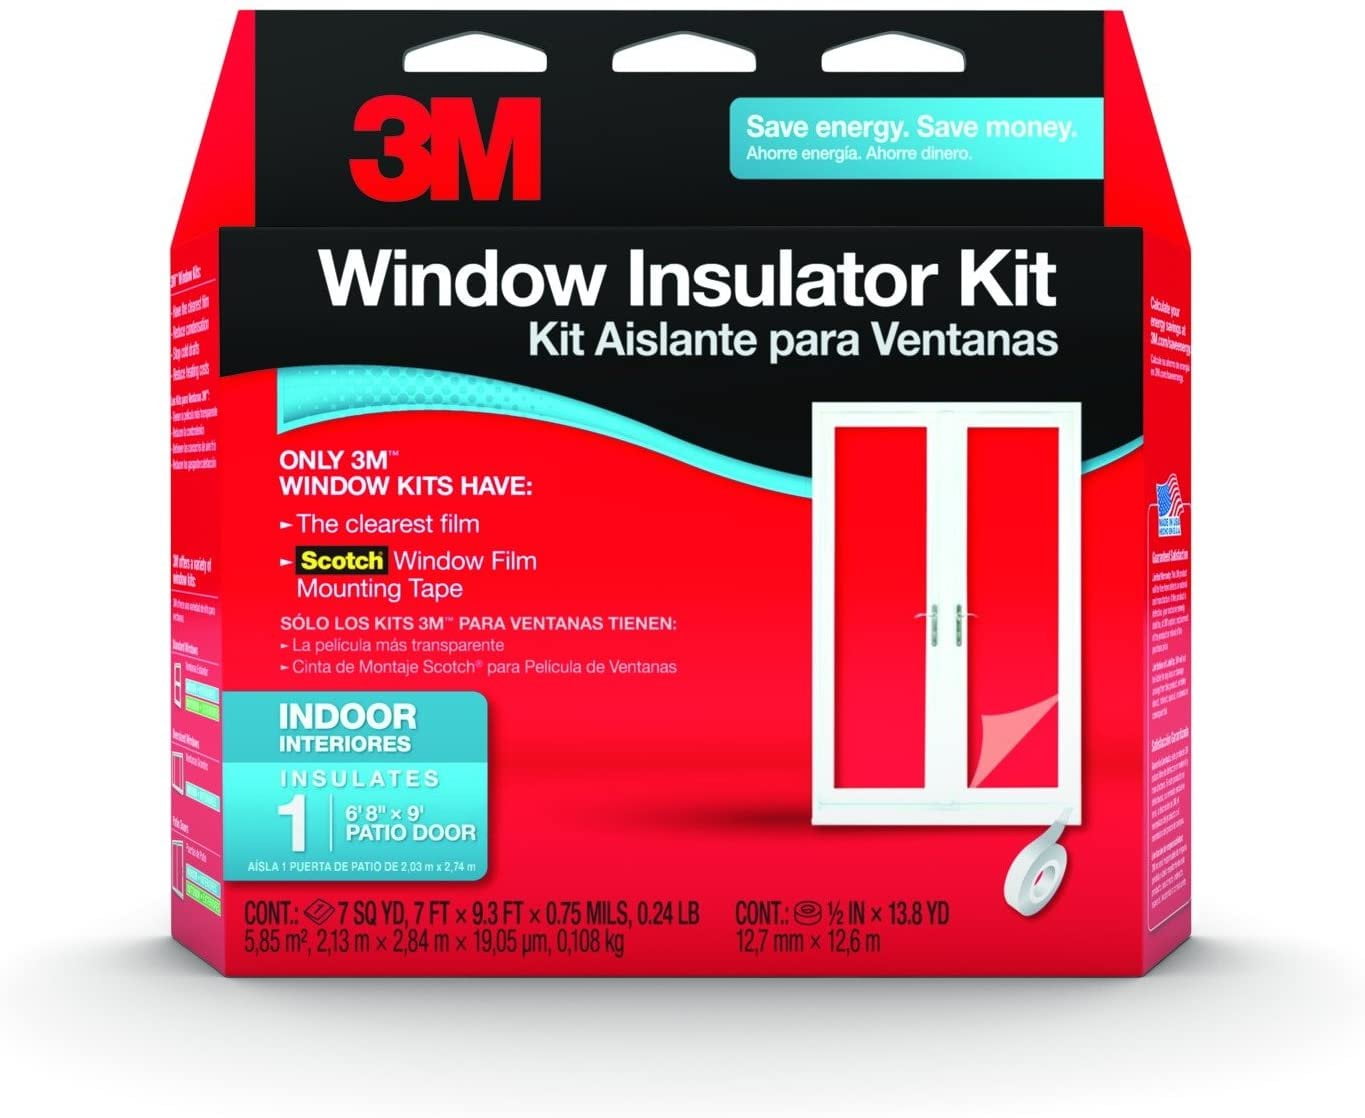 47 x 59 inch Window Insulation Film Kit for Winter, Premium Plastic Window  Film Insulator Kit with Hook & Loop Tape - Keep Cold Air Out